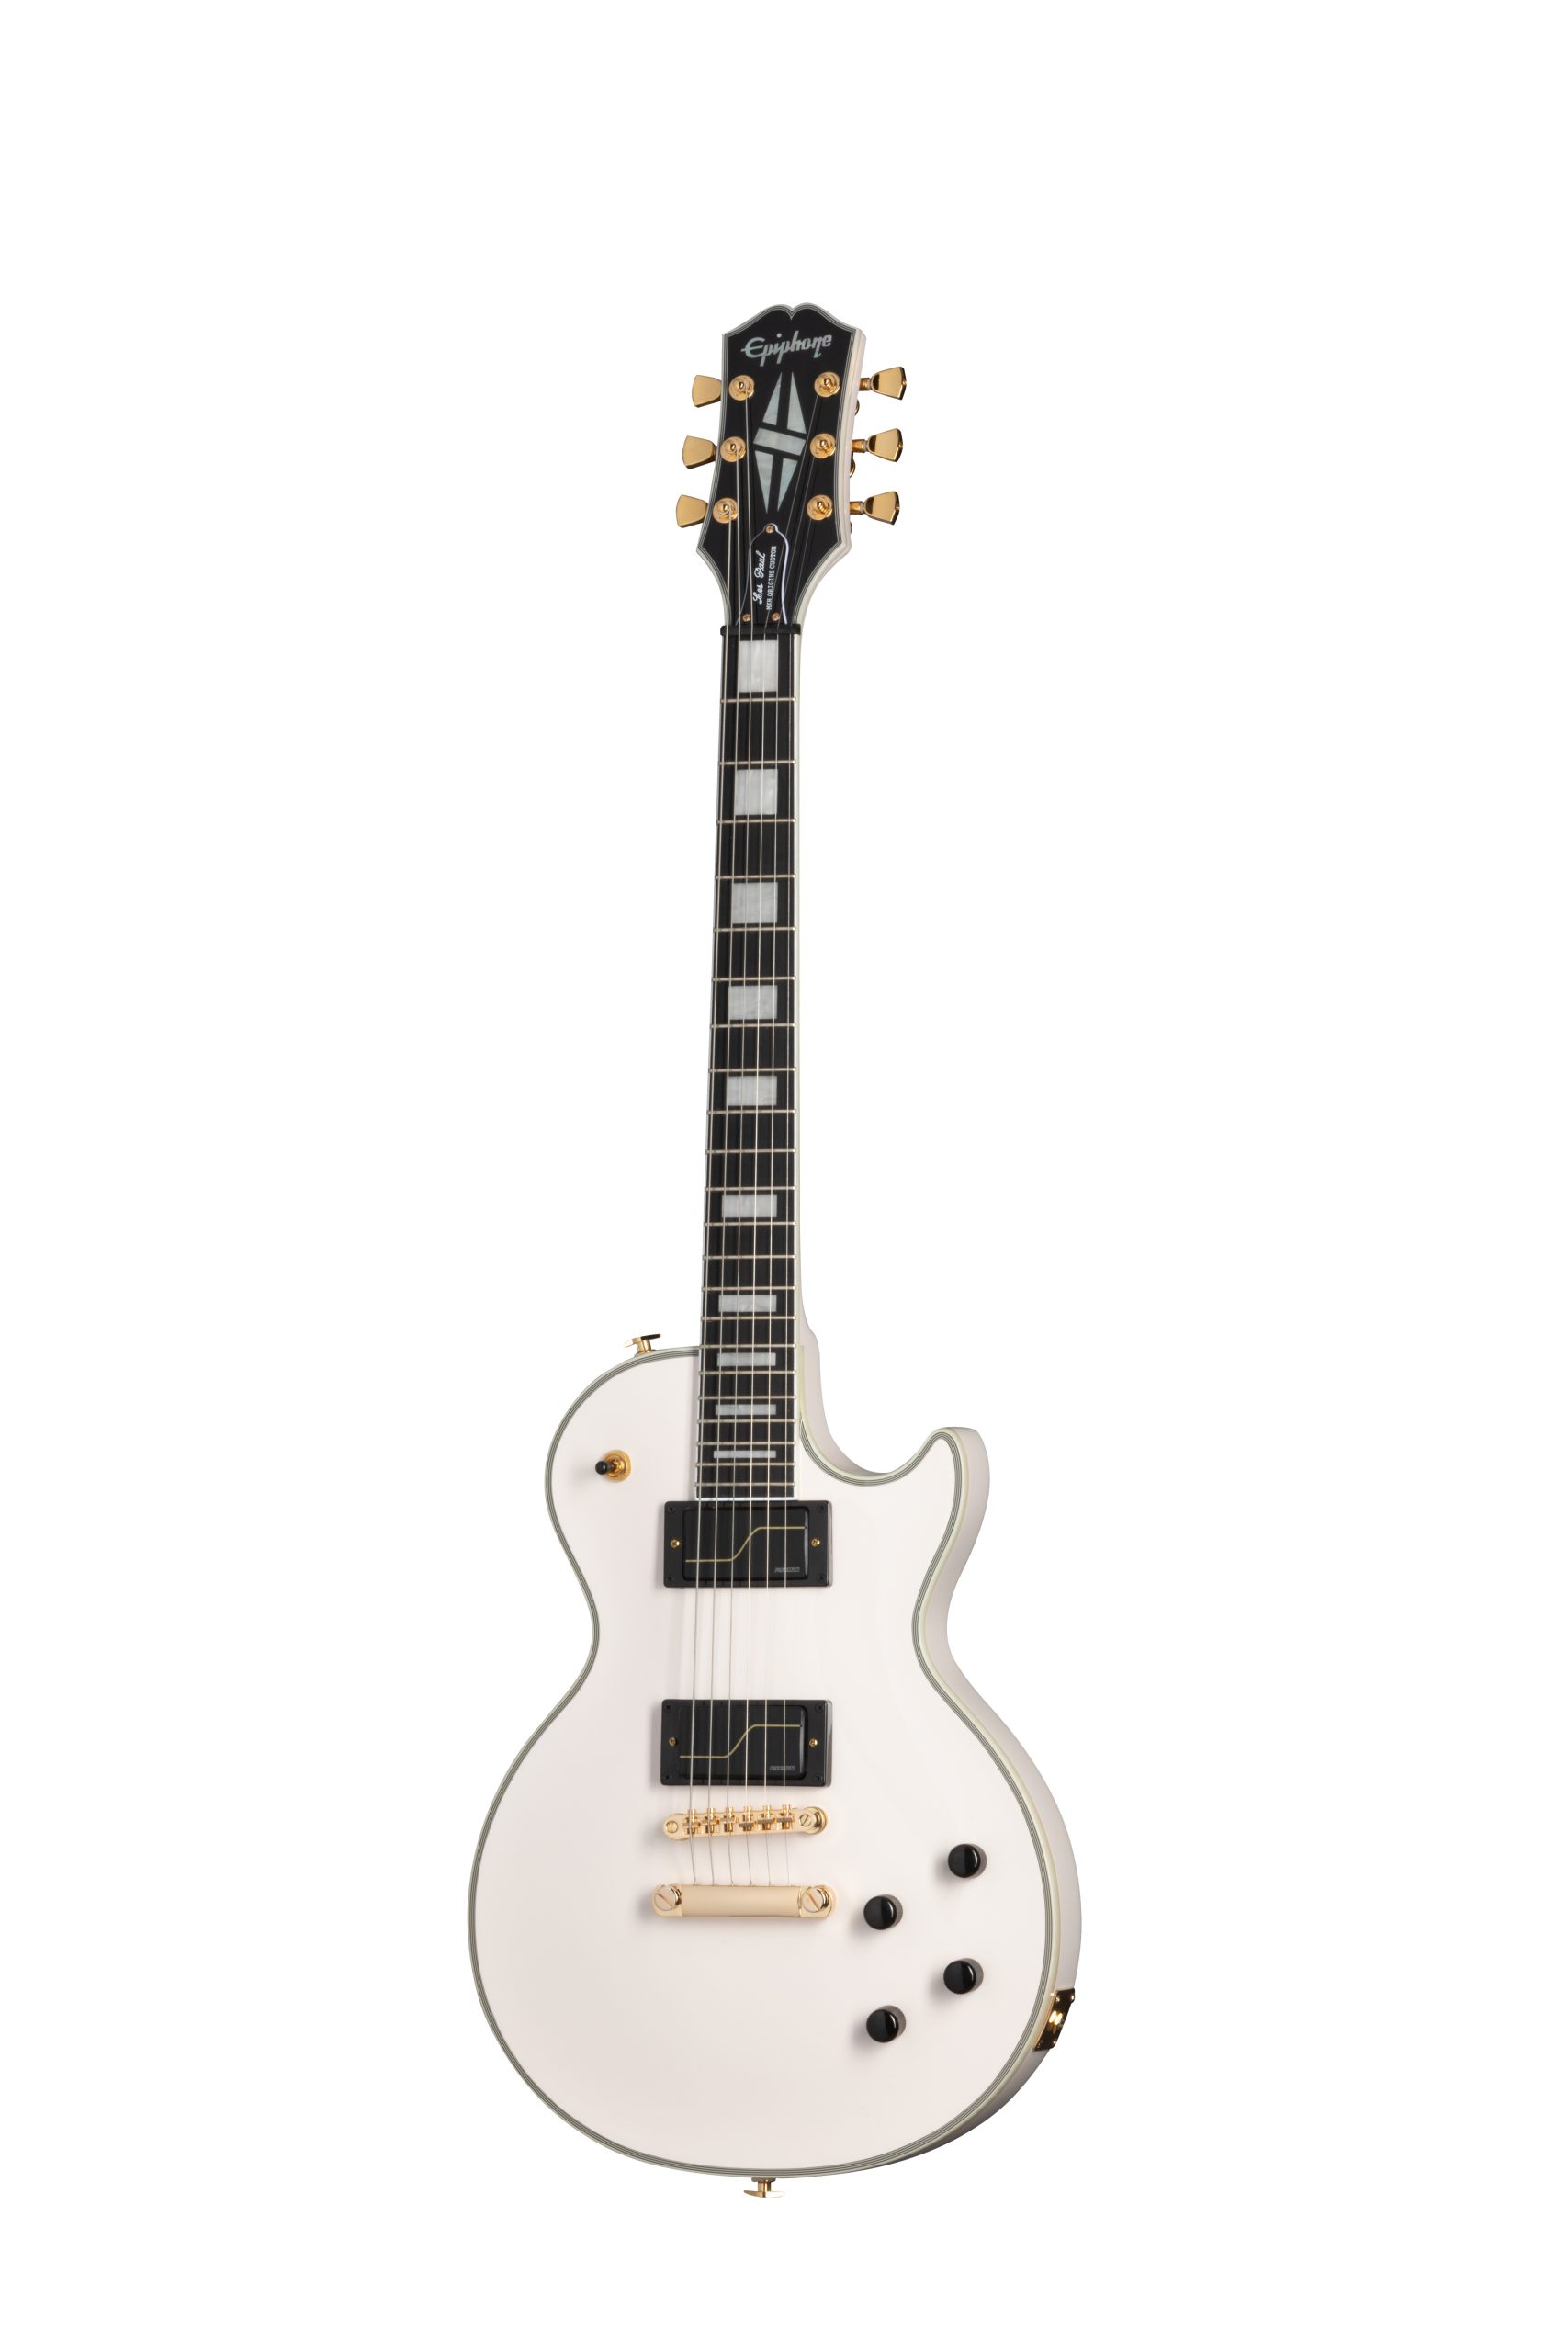 __static.gibson.com_product-images_Epiphone_EPIJD3865_Bone_White_EILPCMKH6BWWGH3_front